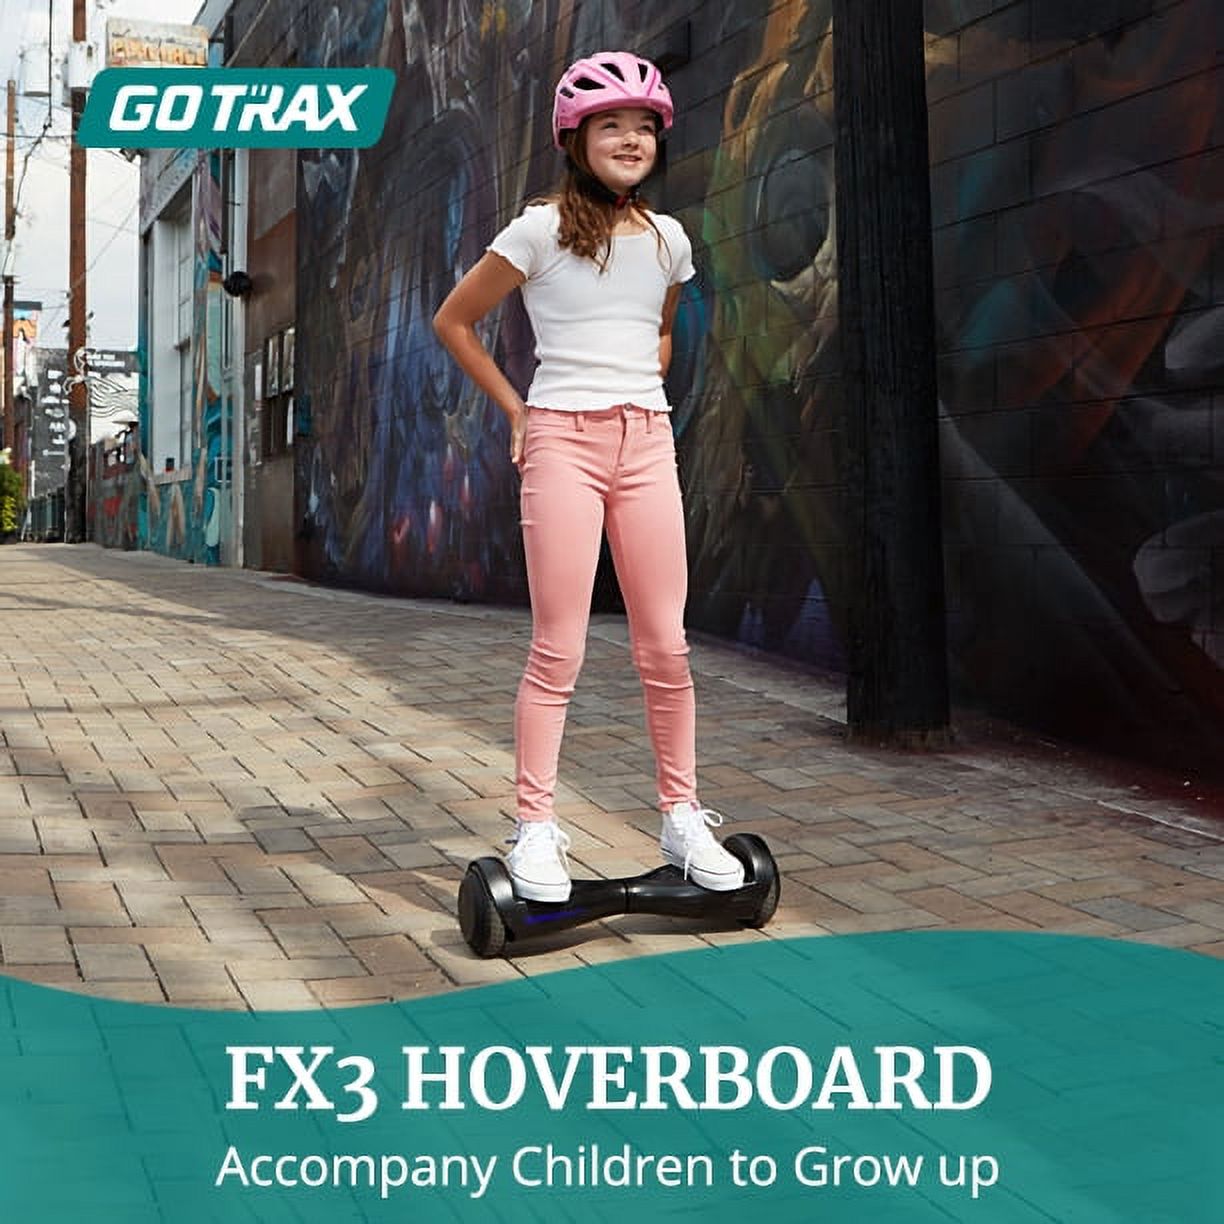 GOTRAX FX3 Hoverboard with 6.2 mph Max Speed, Self Balancing Scooter for 44-176lbs Kids Adults Black - image 3 of 9